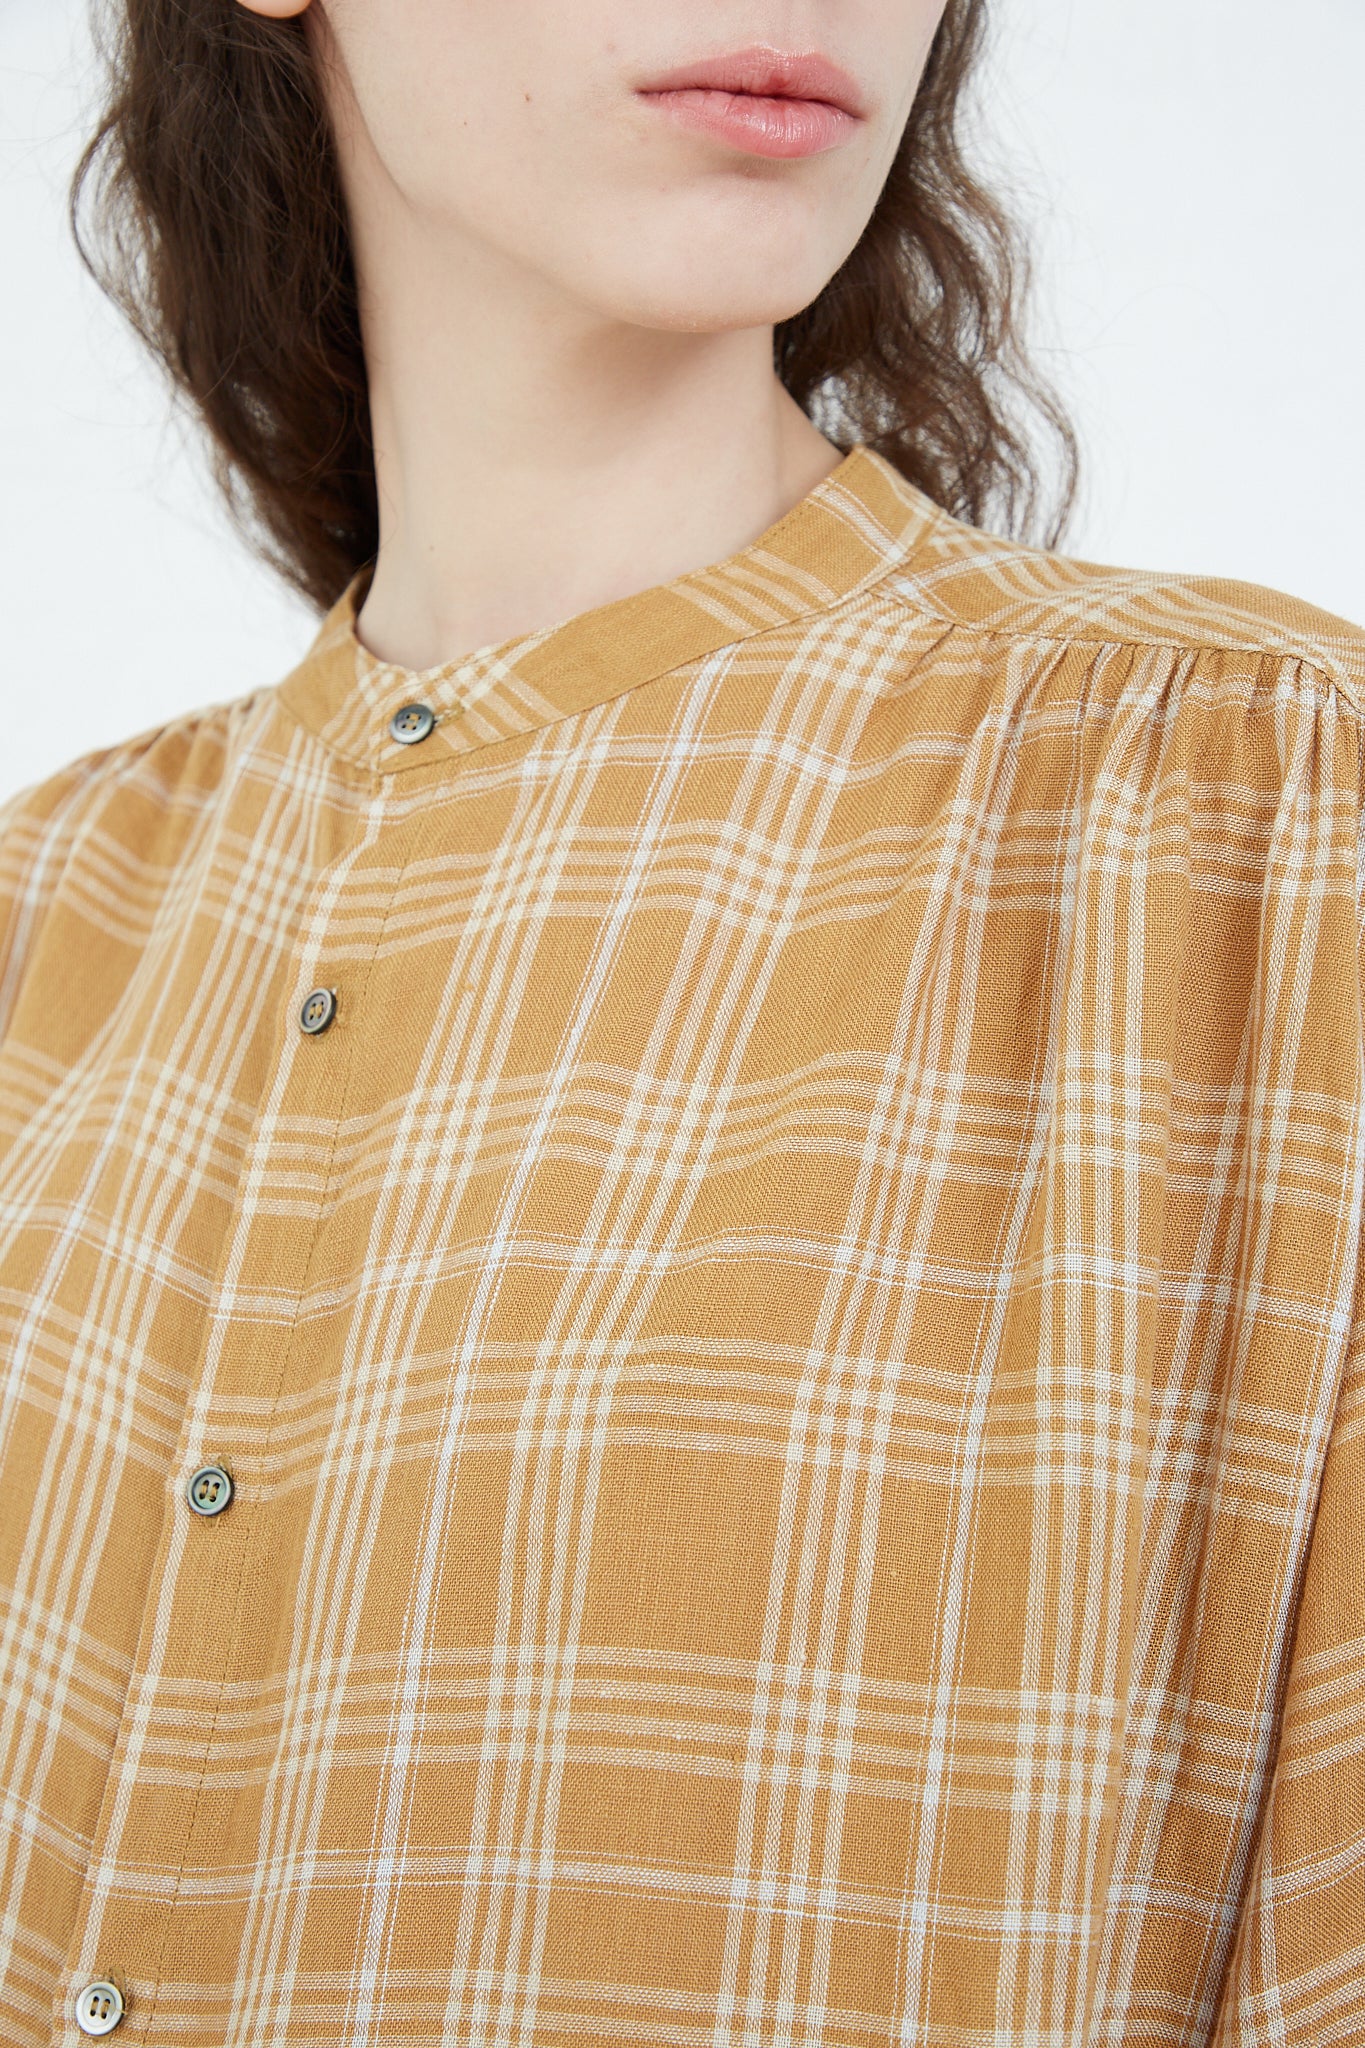 The model is wearing a Linen Check Dress in Camel by Ichi Antiquités.